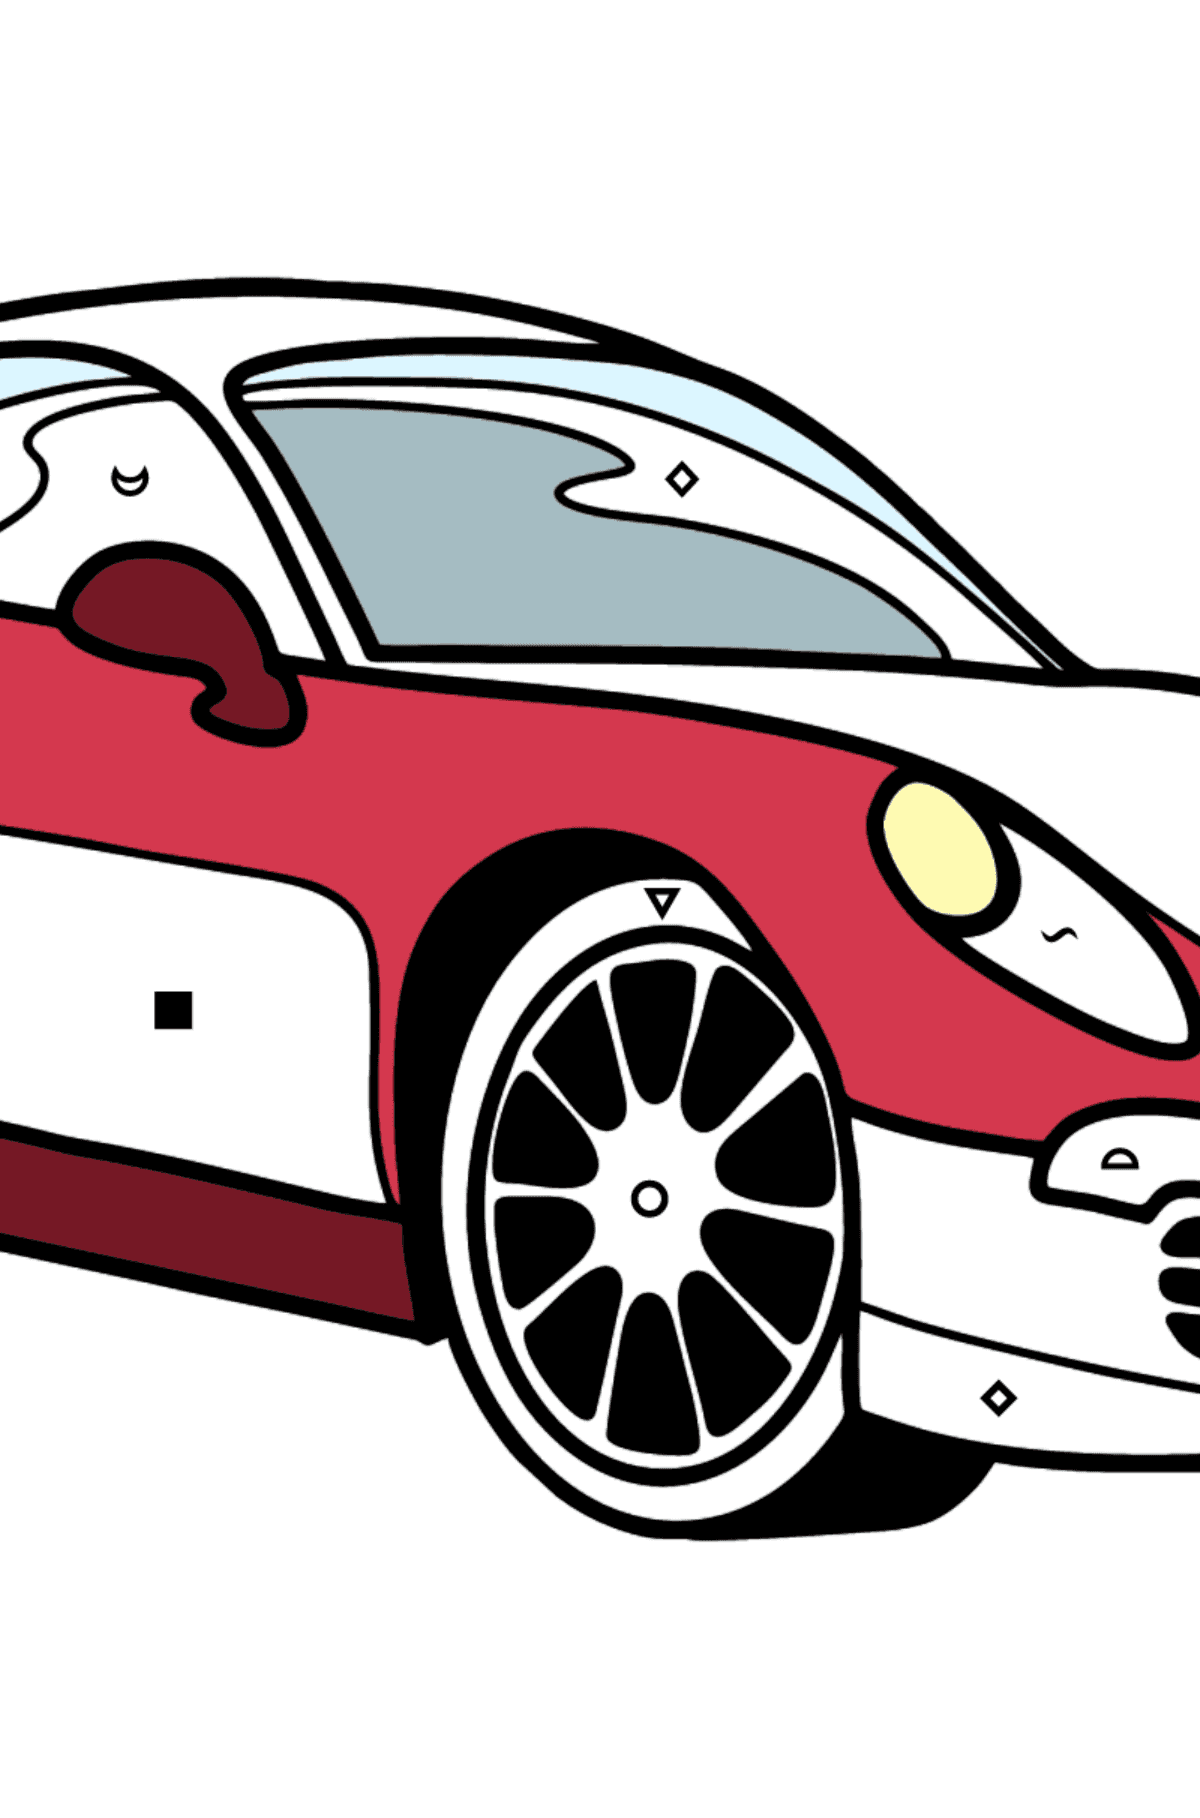 Porsche Cayman Sports Car coloring page - Coloring by Symbols and Geometric Shapes for Kids